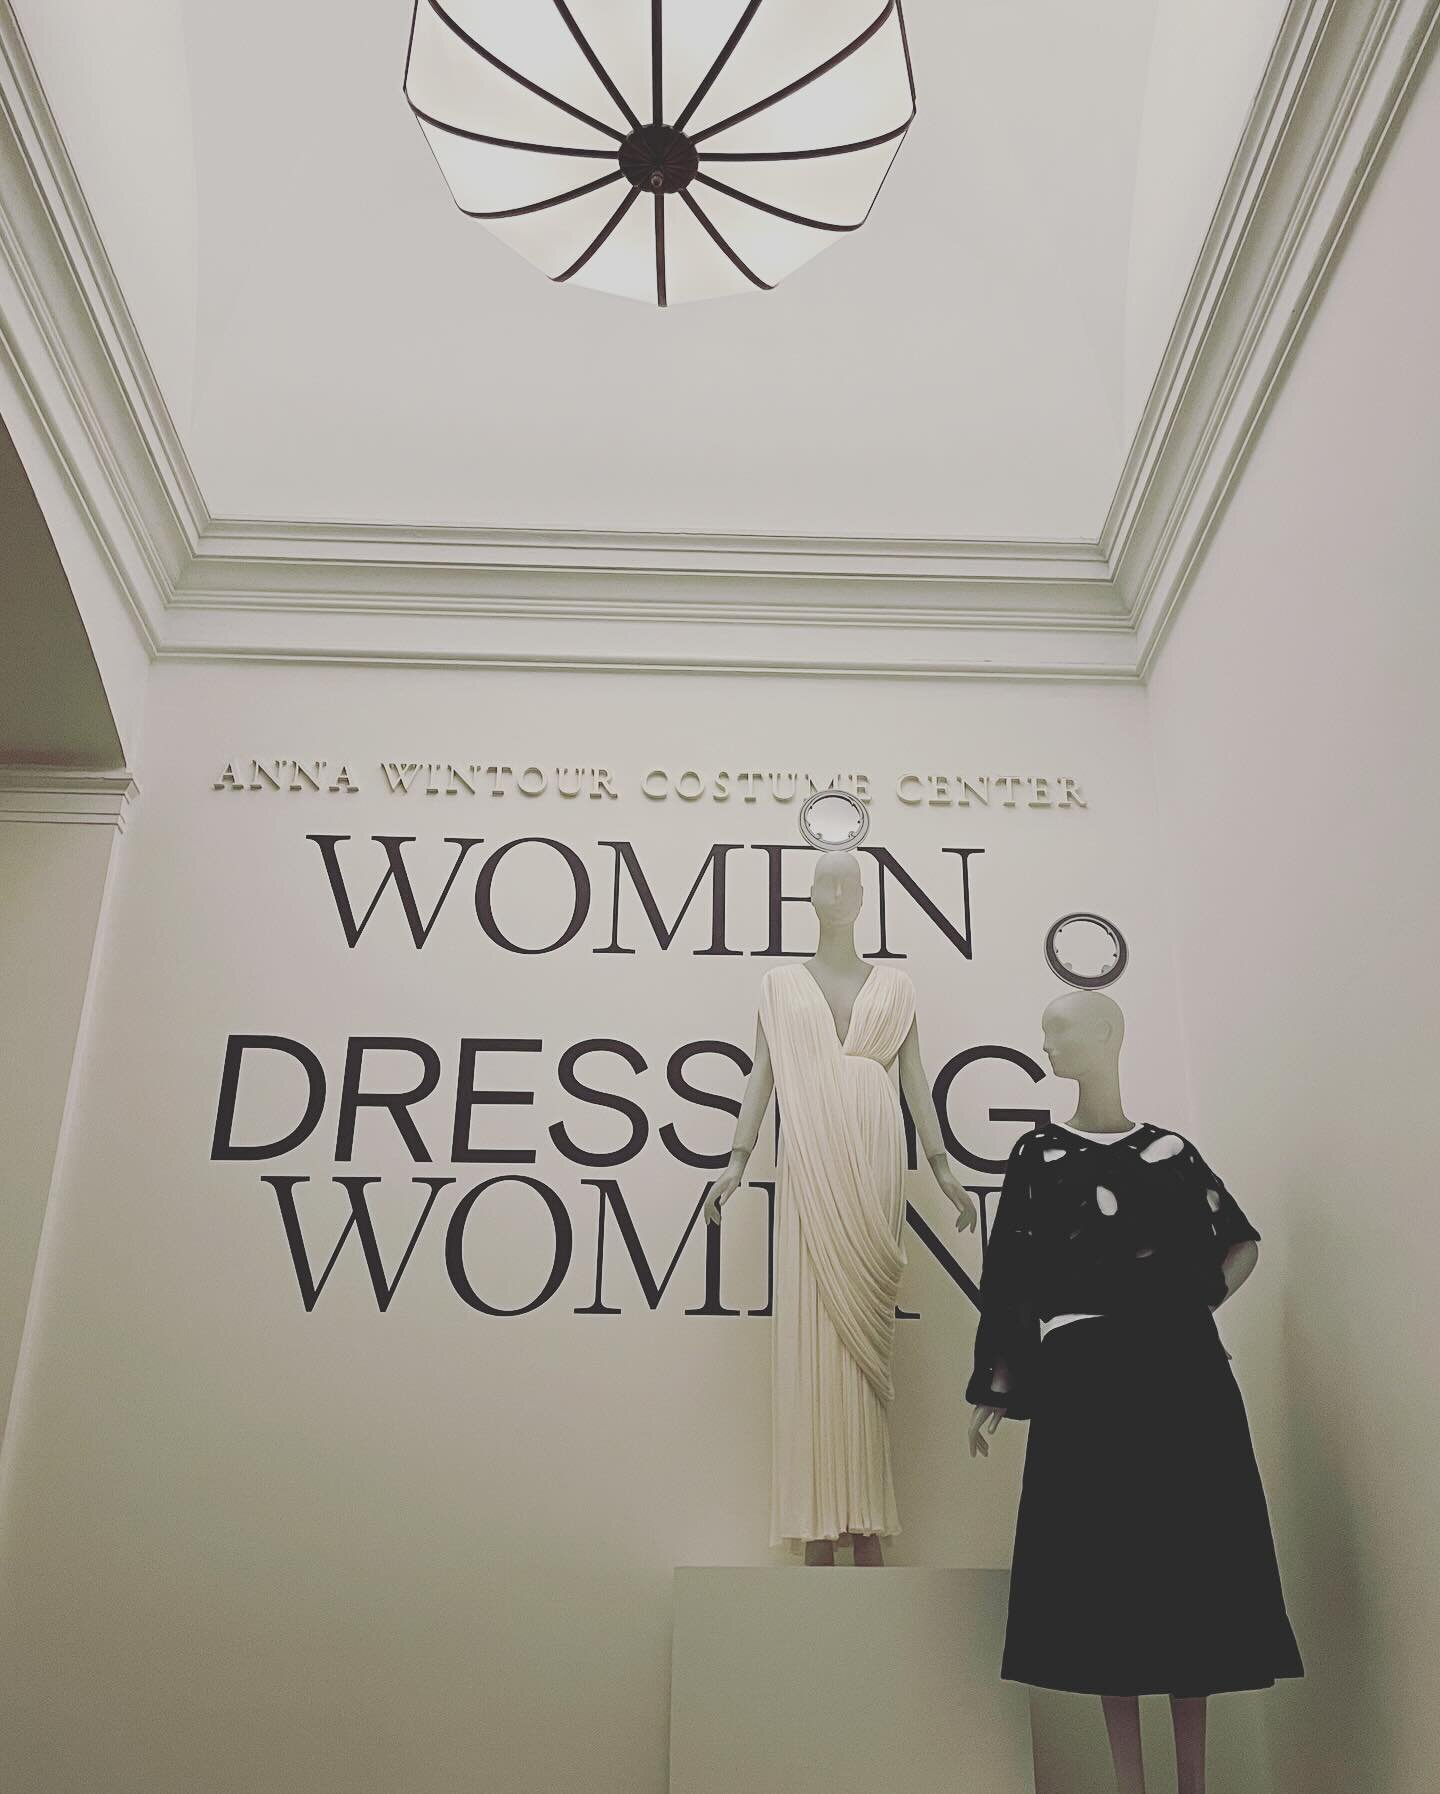 Women Dressing Women at The Met was so inspiring to see. Definitely felt all the generations of female energy in the room 💜 #fashion #futureisfemale #themetmuseum #womendressingwomen